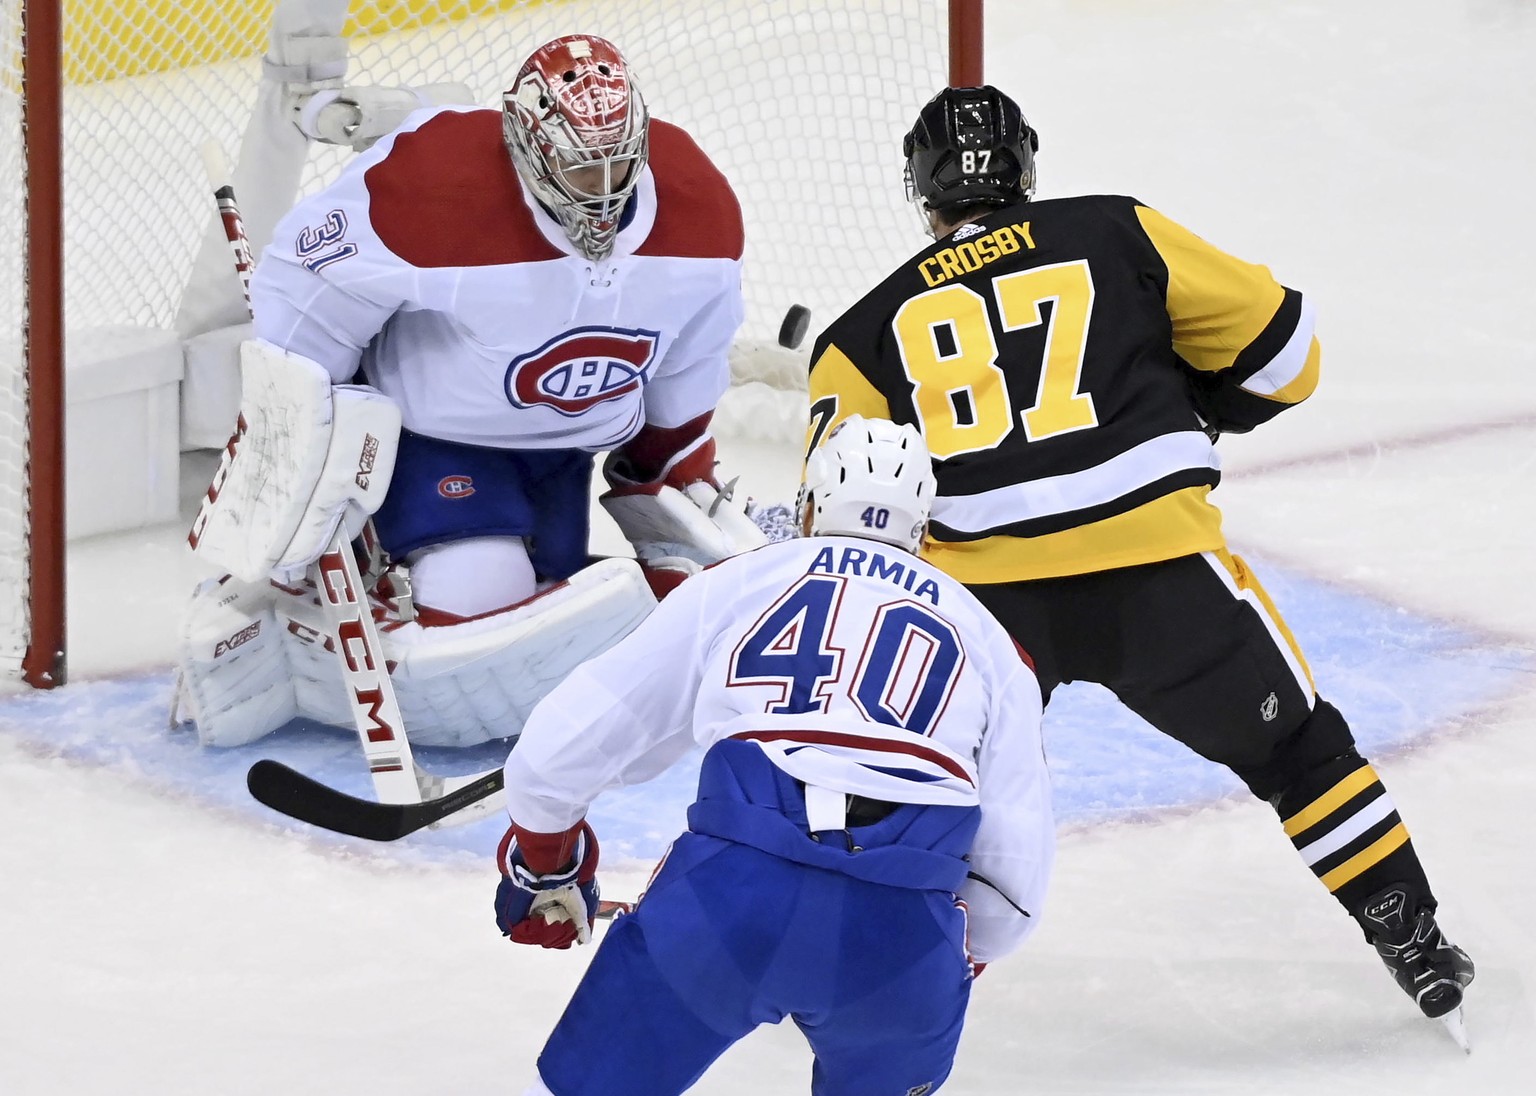 Pittsburgh Penguins center Sidney Crosby (87) scores on Montreal Canadiens goaltender Carey Price (31) as teammate Joel Armia (40) looks on during the first period of an NHL hockey playoff game Saturd ...